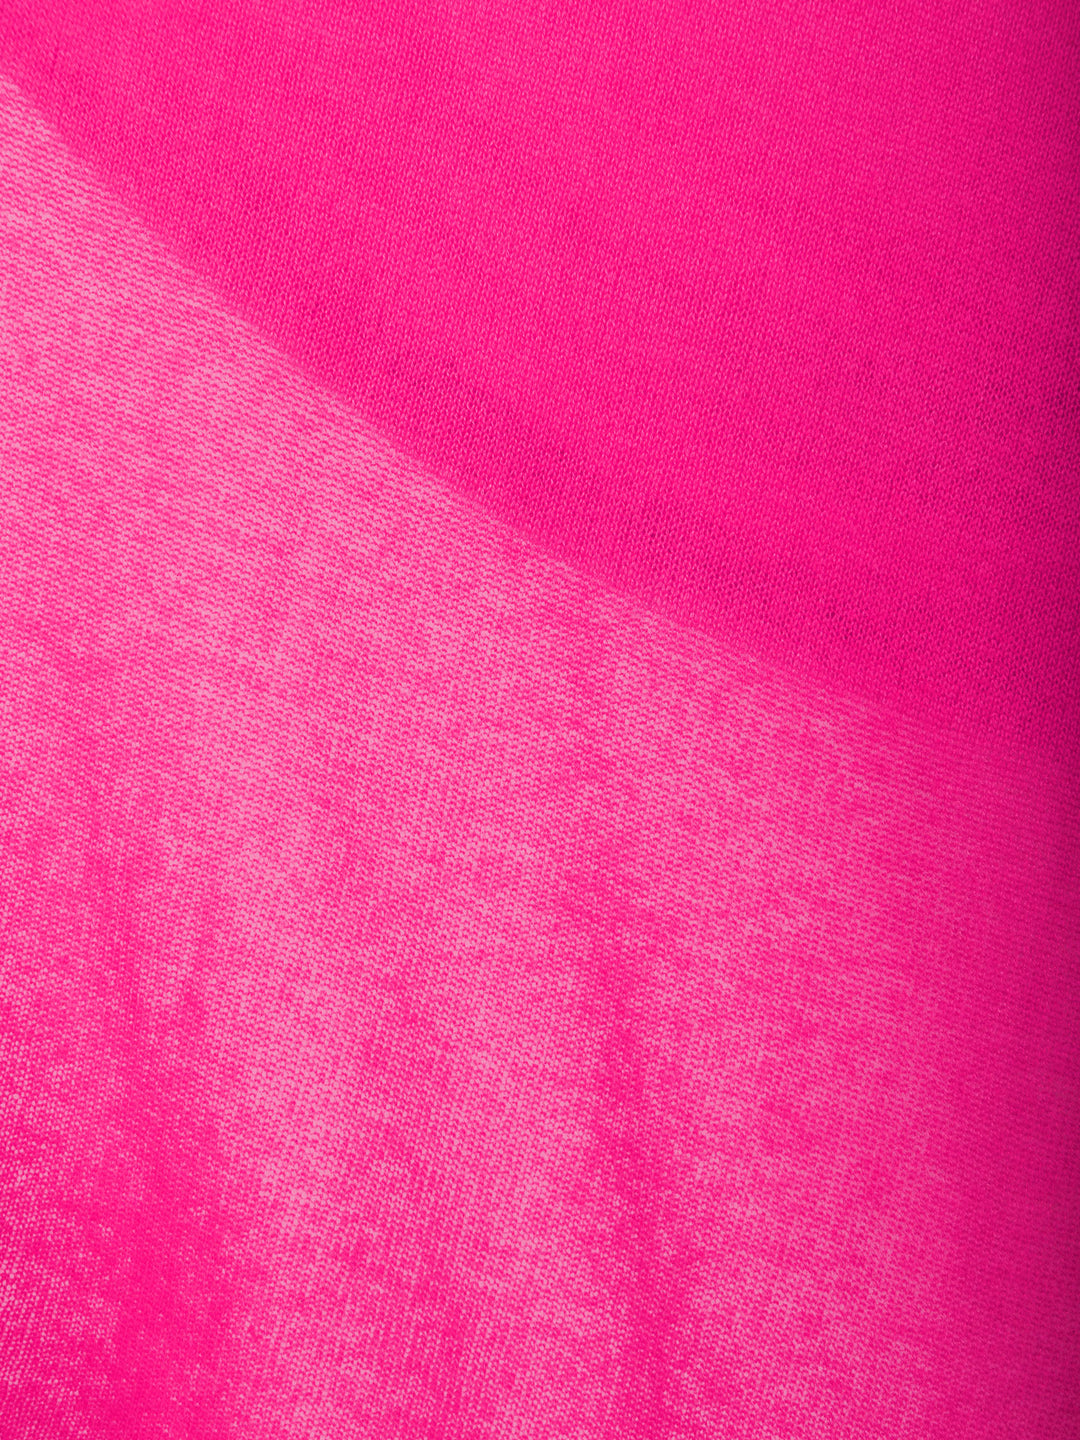 Cashmere scarf "Flow" 100% cashmere airy and light. Norwegian design. Hot pink